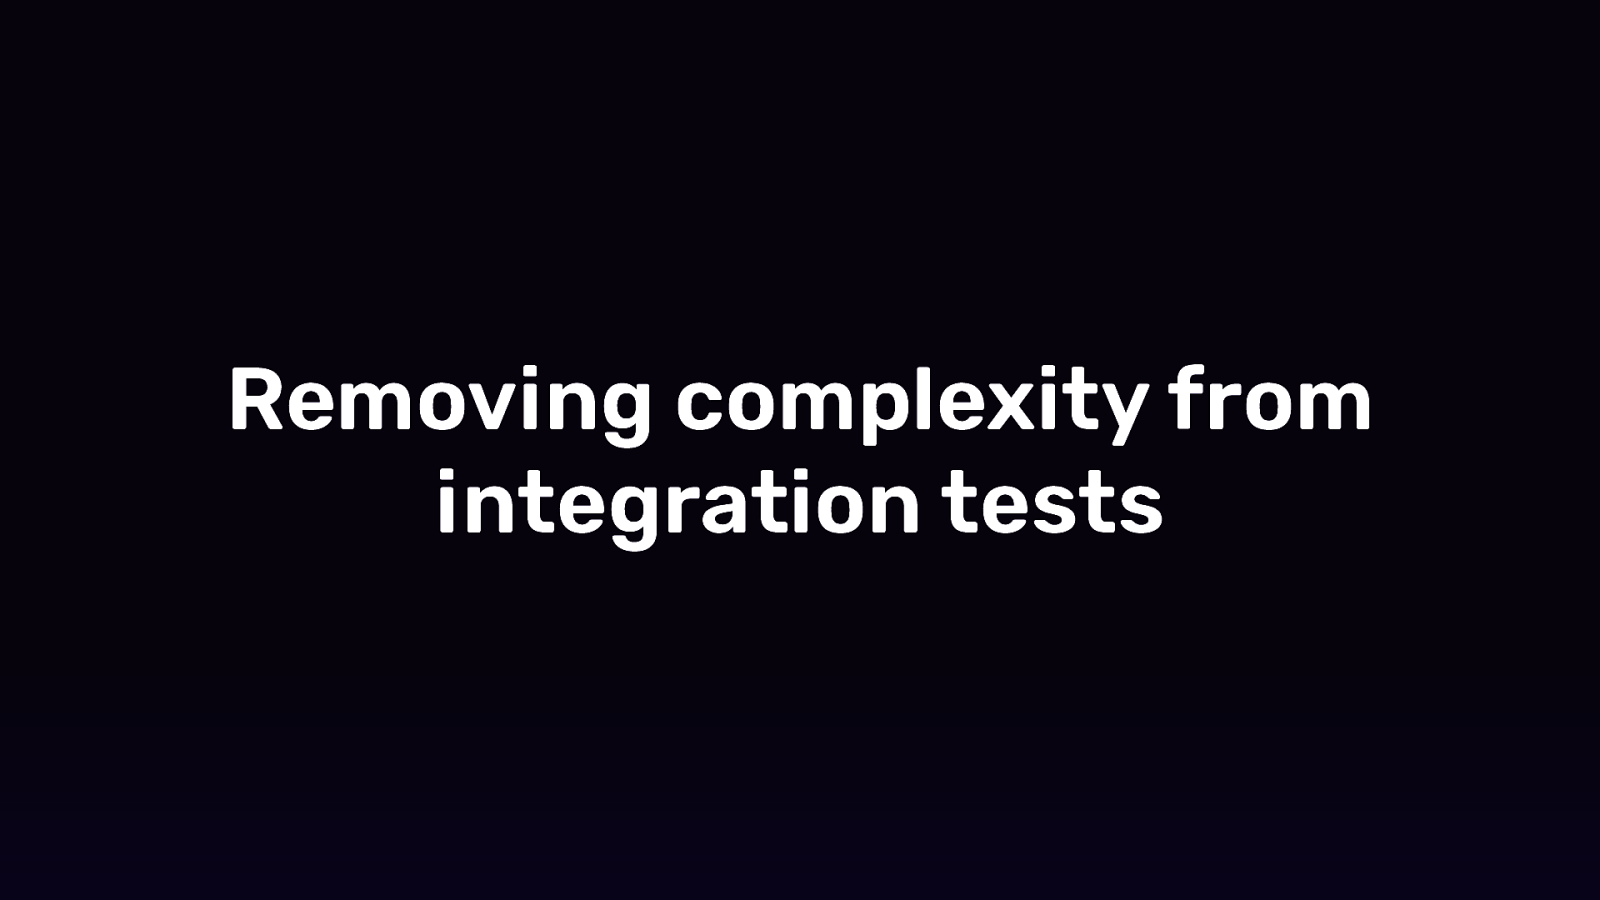 Removing complexity from integration tests using Testcontainers!